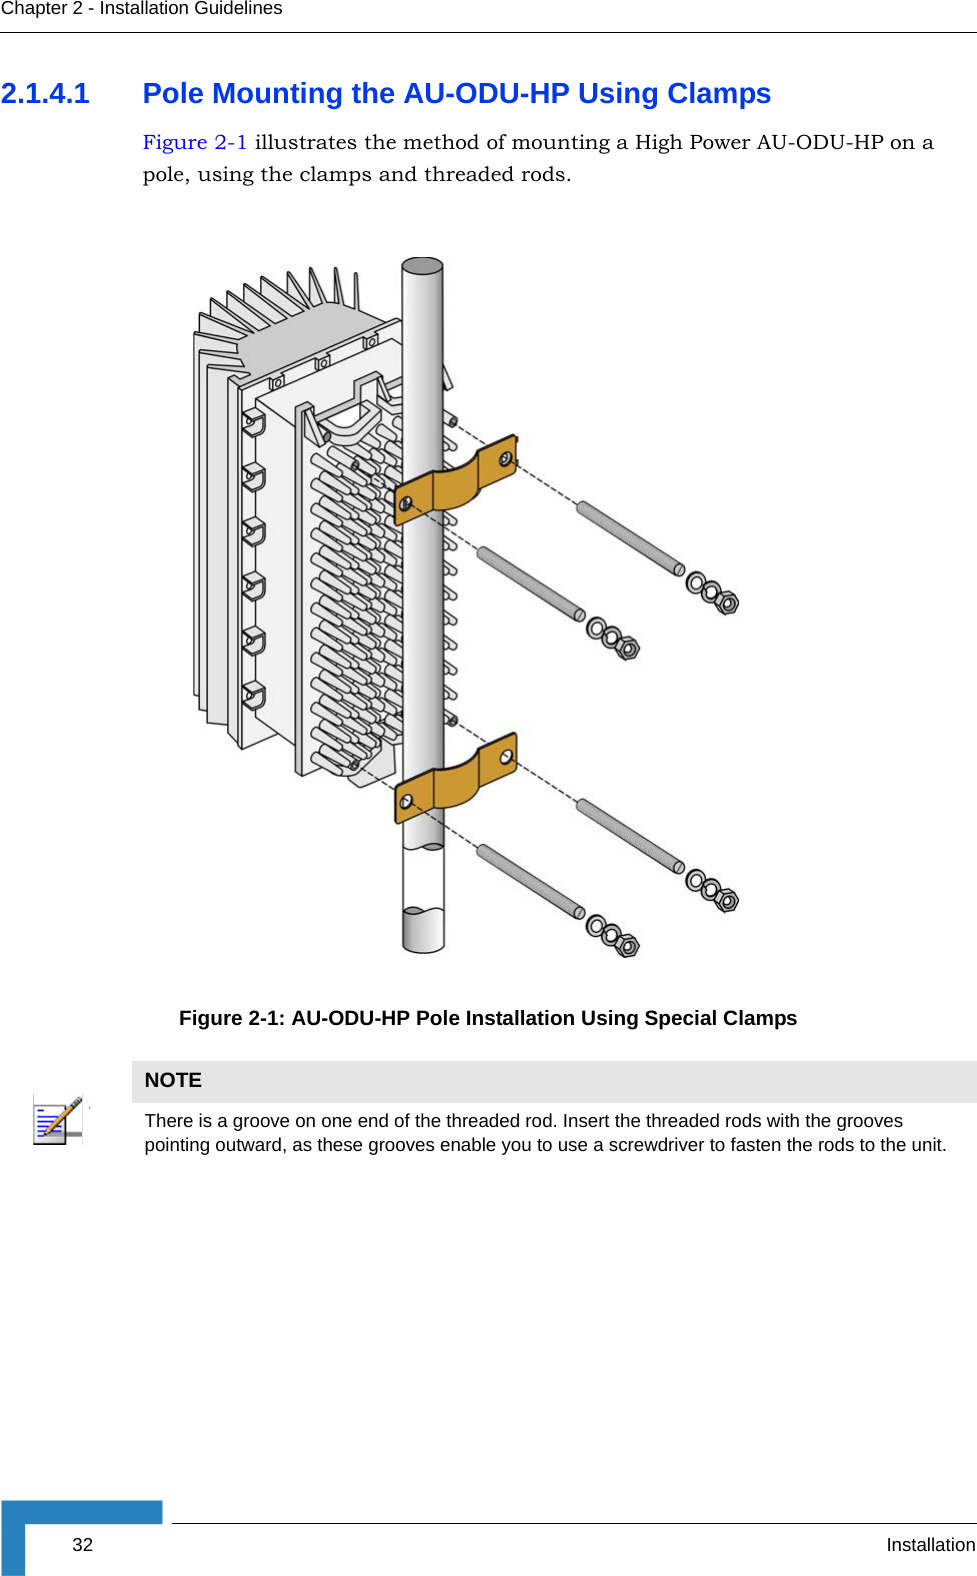 32 InstallationChapter 2 - Installation Guidelines2.1.4.1 Pole Mounting the AU-ODU-HP Using ClampsFigure 2-1 illustrates the method of mounting a High Power AU-ODU-HP on a pole, using the clamps and threaded rods.Figure 2-1: AU-ODU-HP Pole Installation Using Special ClampsNOTEThere is a groove on one end of the threaded rod. Insert the threaded rods with the grooves pointing outward, as these grooves enable you to use a screwdriver to fasten the rods to the unit.I